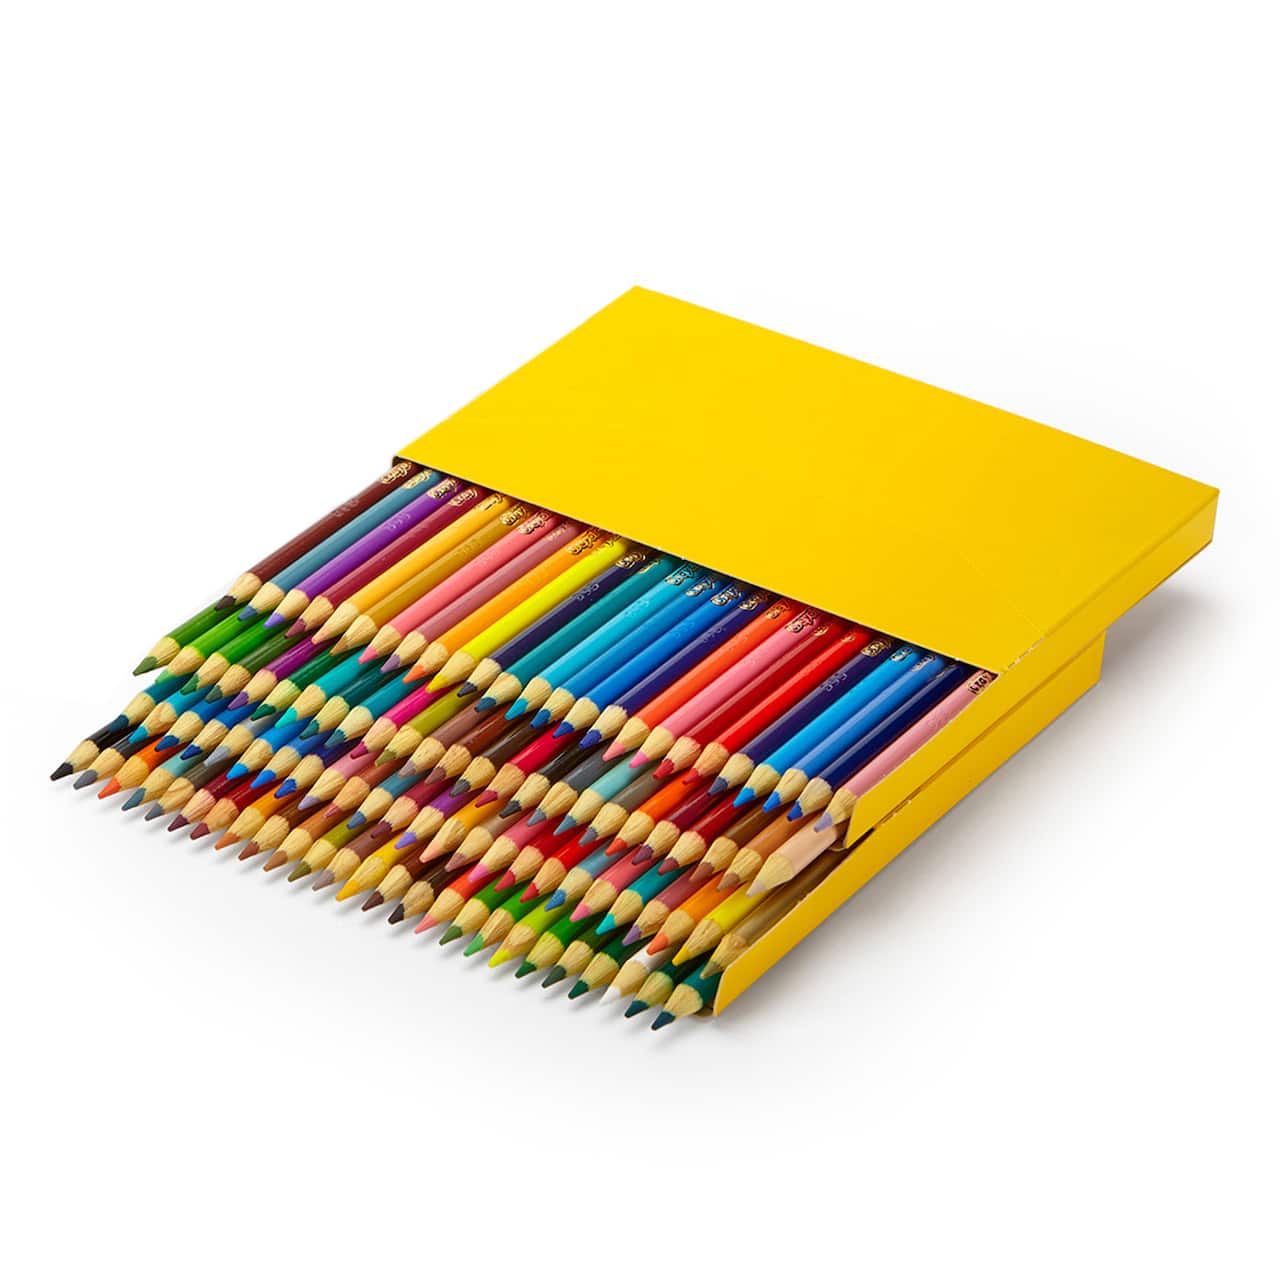 6 Packs: 100 ct. (600 total) Crayola® Colored Pencils